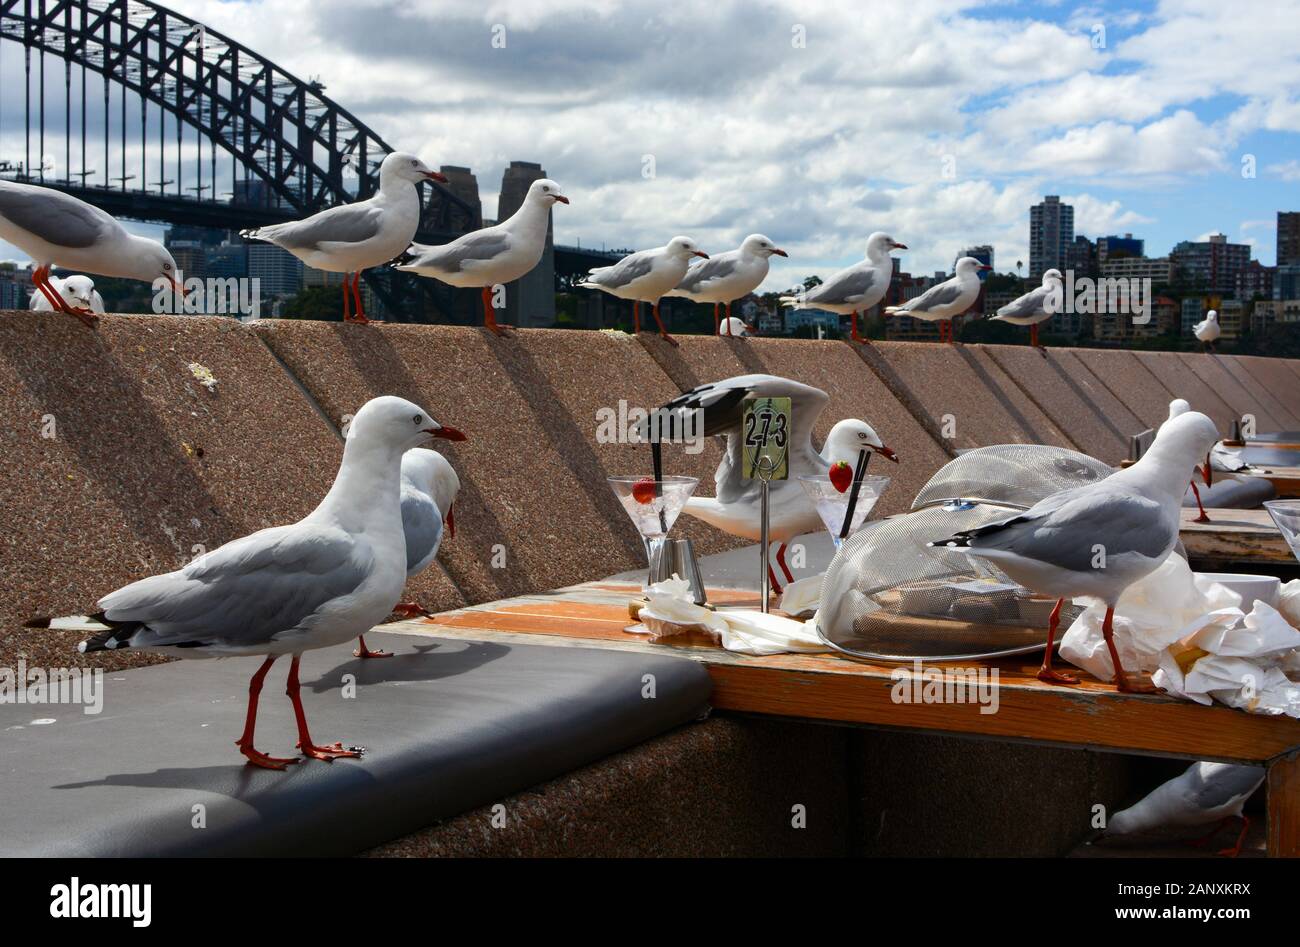 A hungry flock of seagulls moves in for food leftovers at a casual dining area along Sydney Harbor Stock Photo